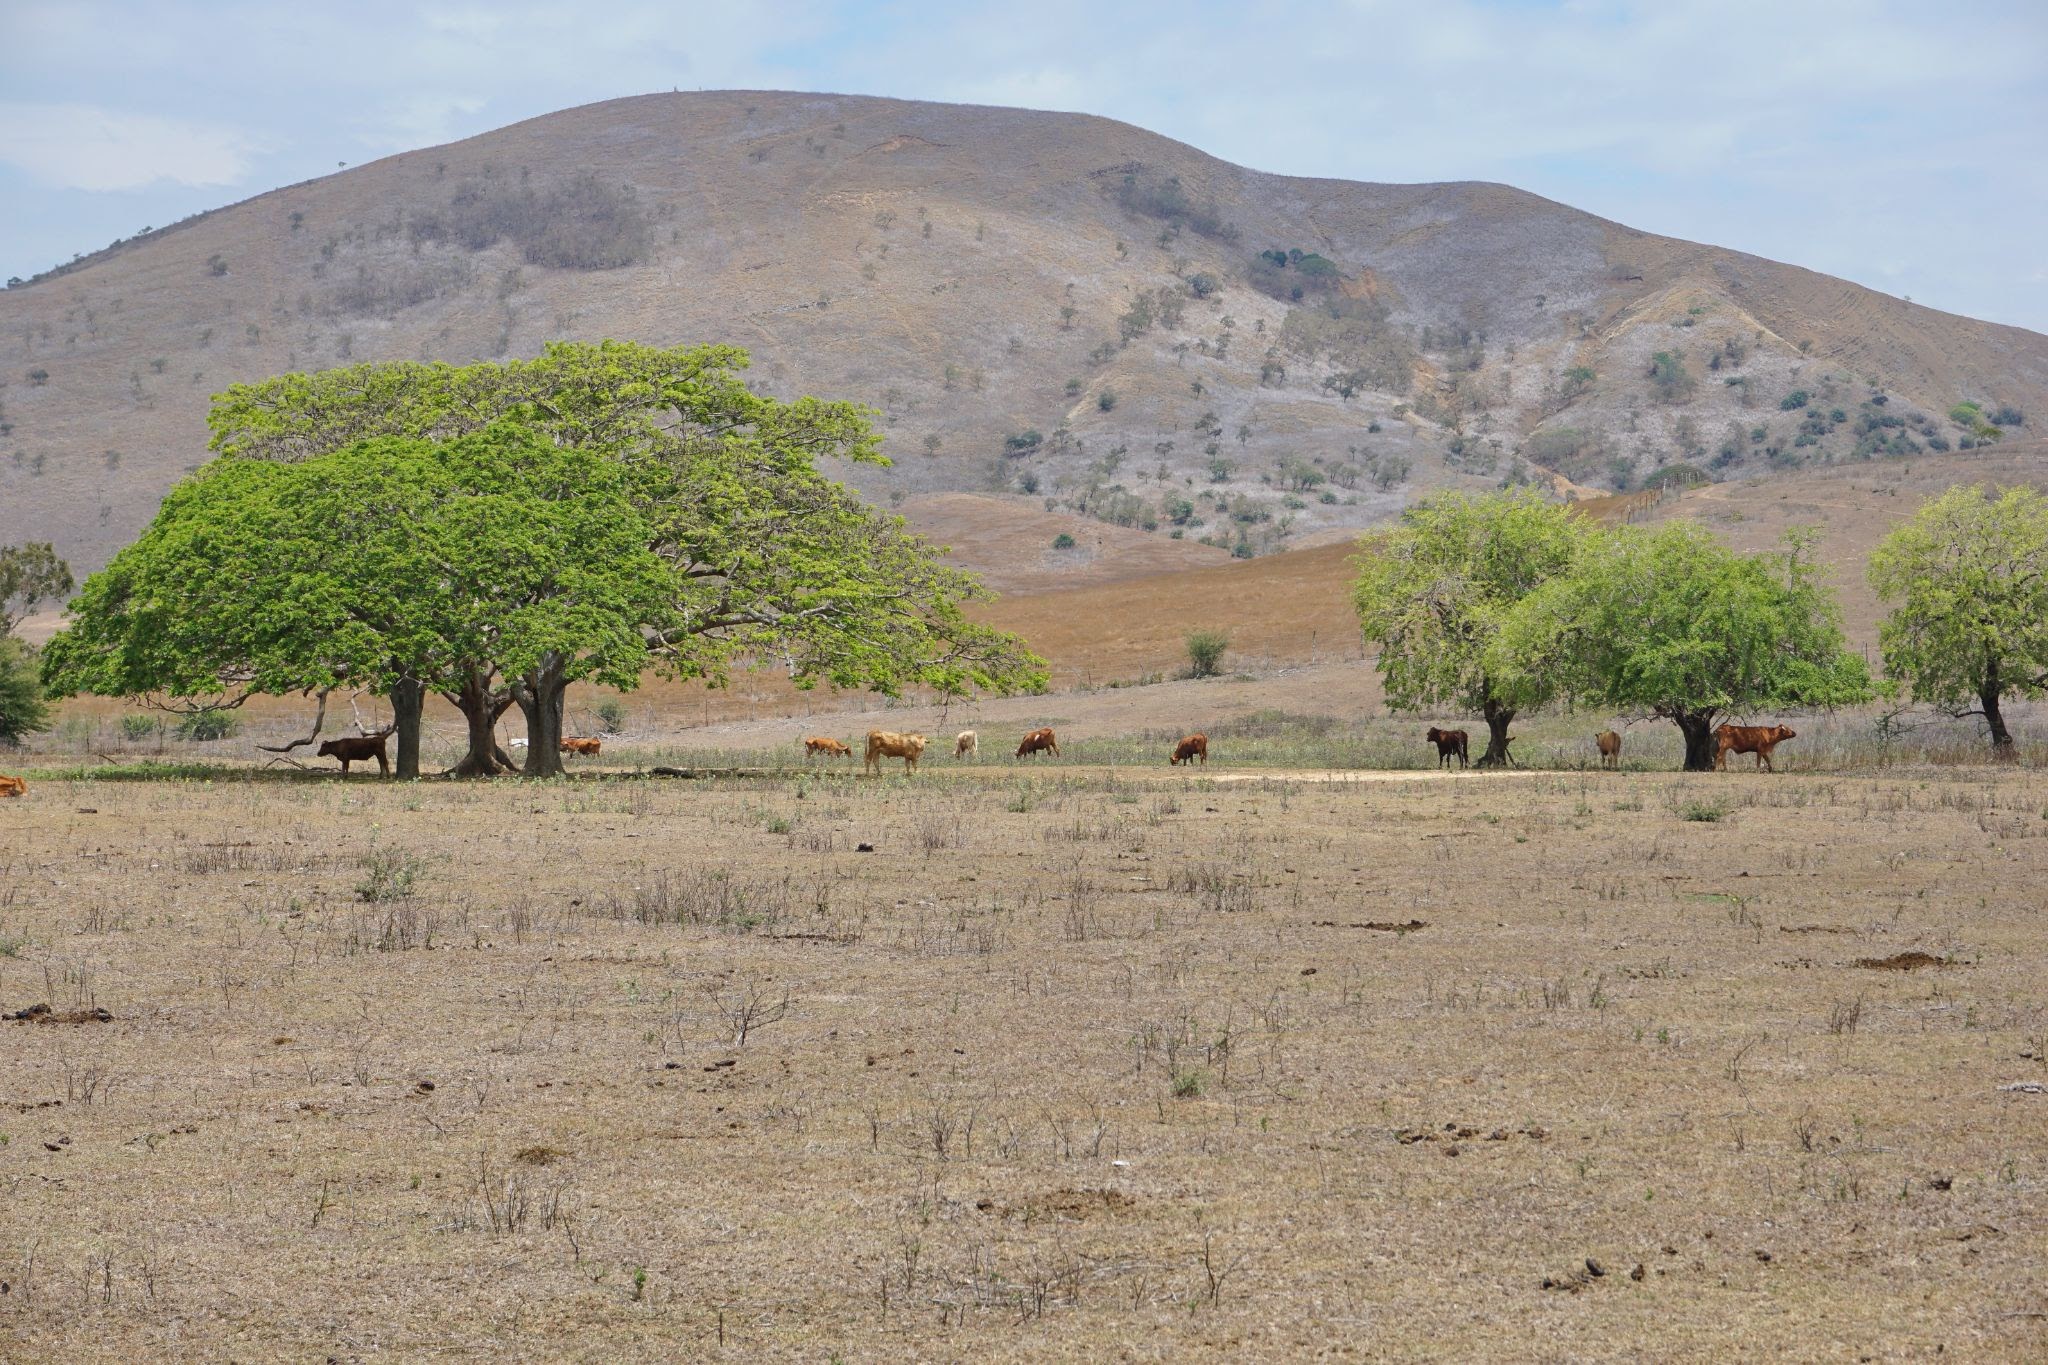 African plain with animals, trees and a hill